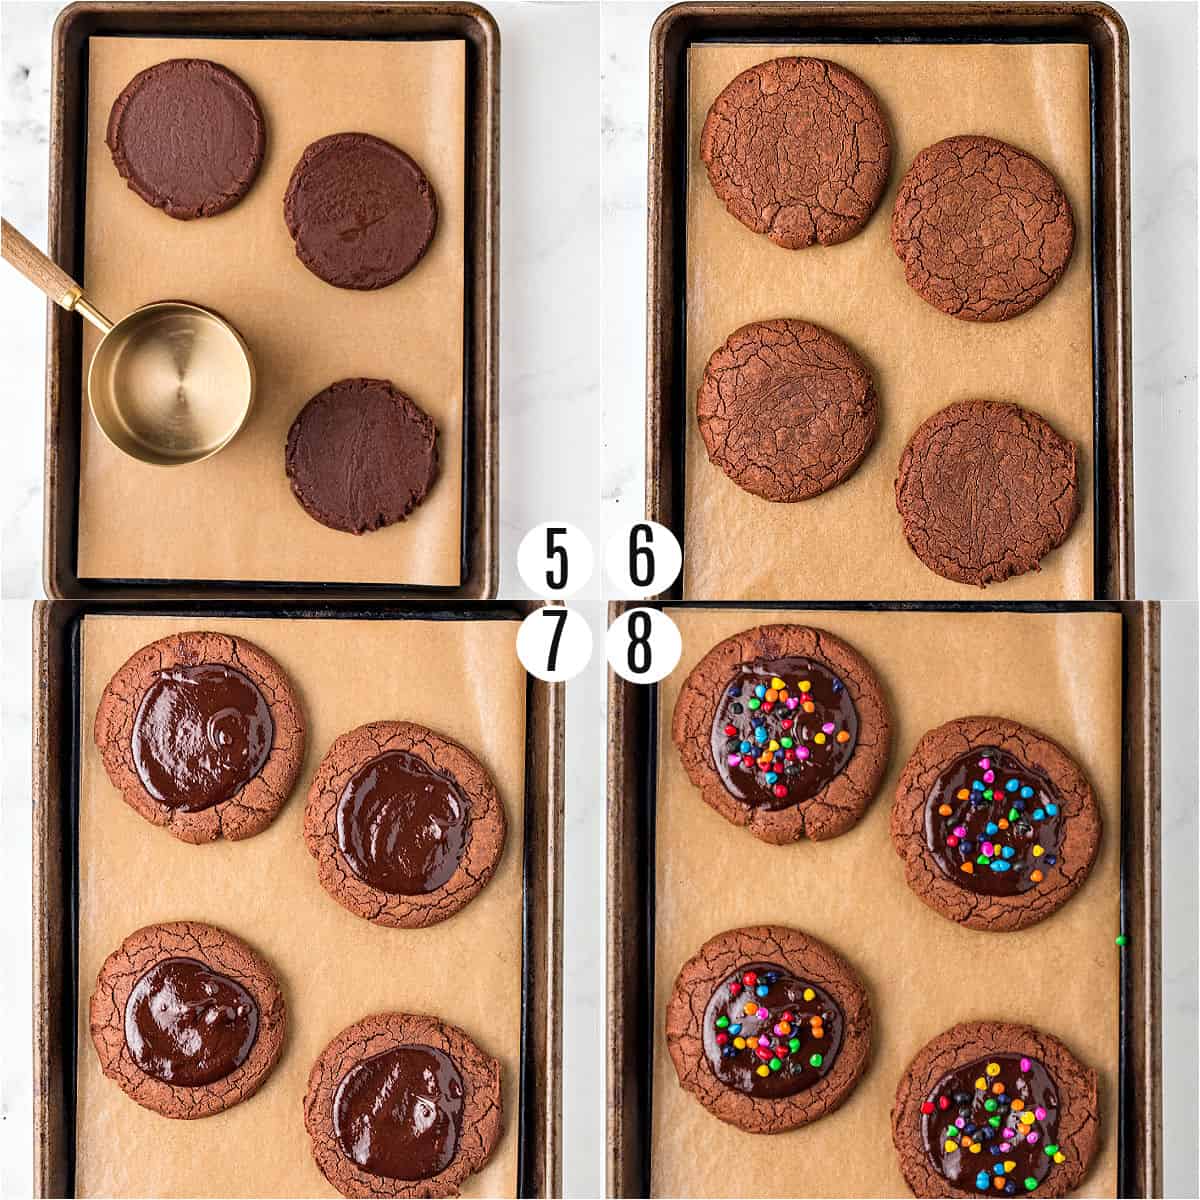 Step by step photos showing how to assemble cosmic brownie cookies.